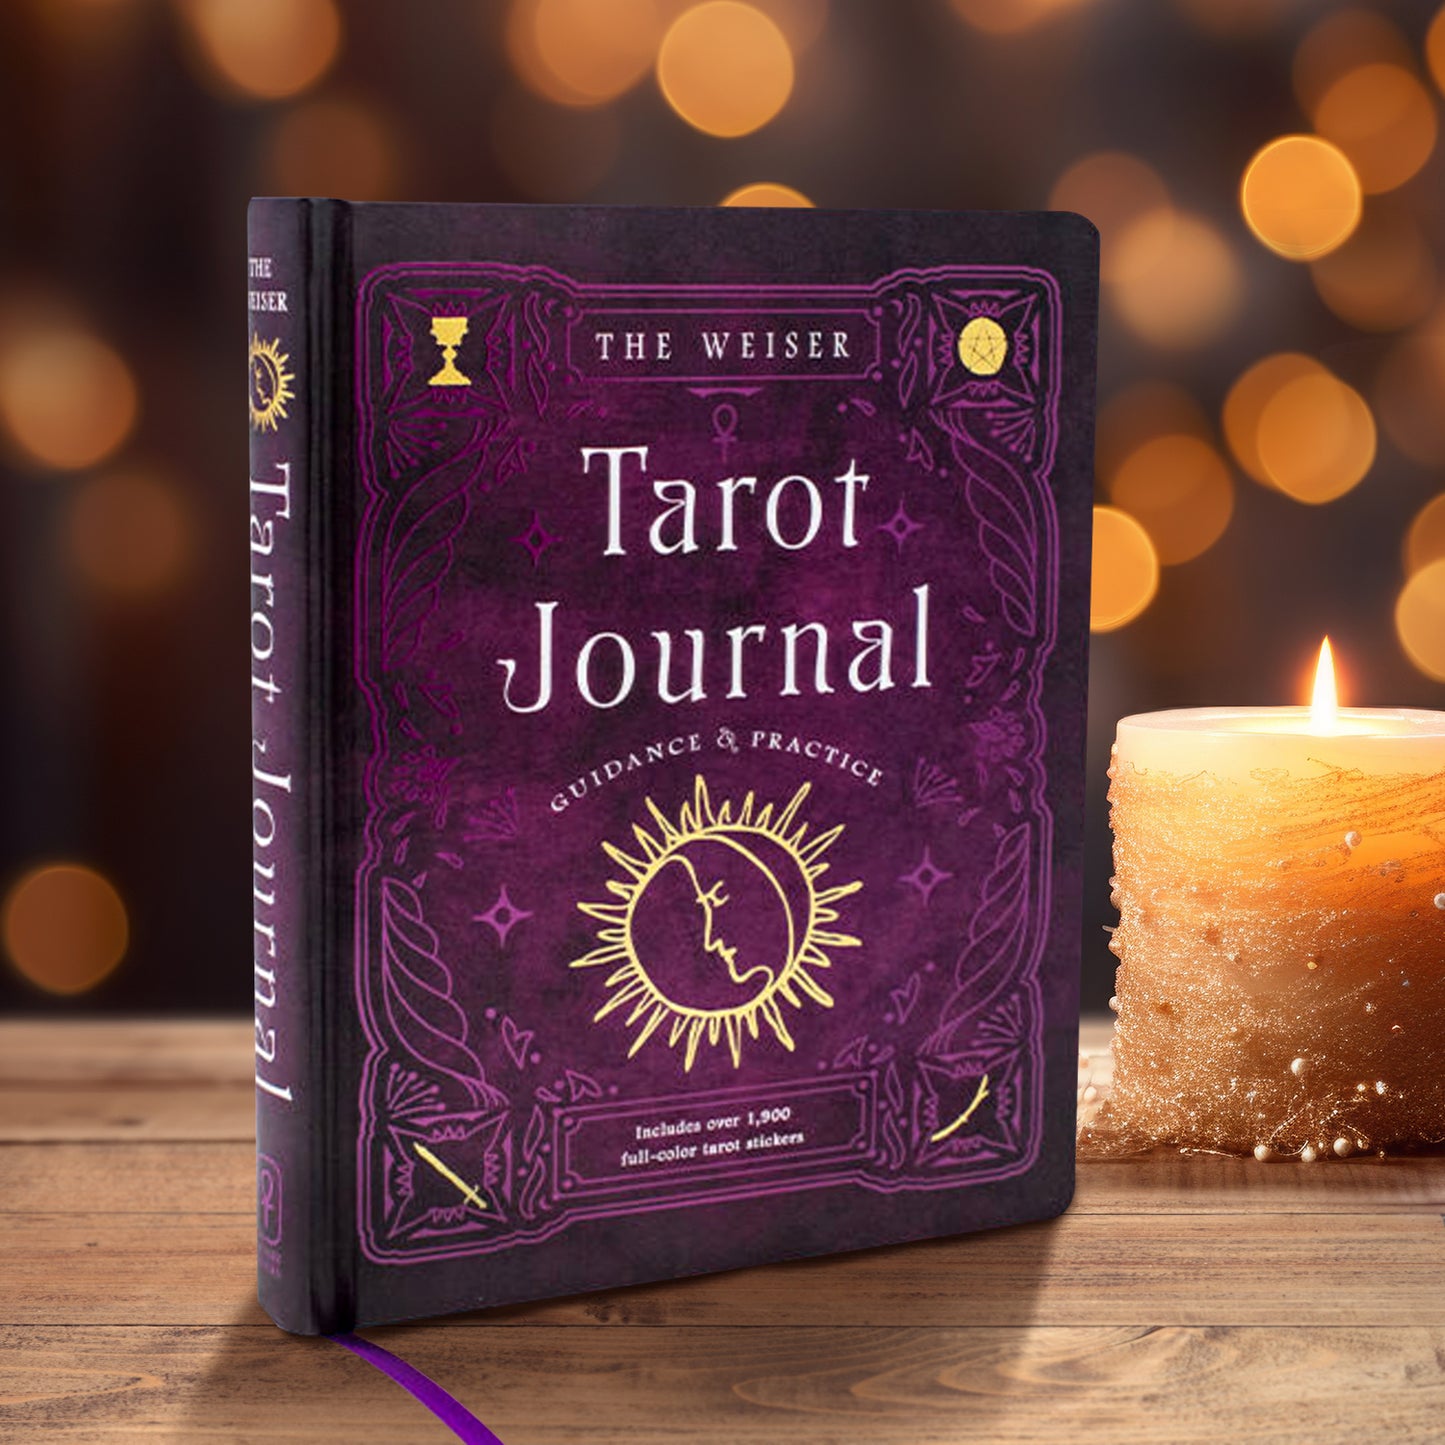 A purple book on a wooden table. The cover has purple sigils drawn across the front. White text in the center says “The Weiser Tarot Journal: guidance & practice.” Below the text is a yellow depiction of the sun, with a half-moon face in the center. Next to the book is a lit candle. In the background are twinkling amber-colored lights.